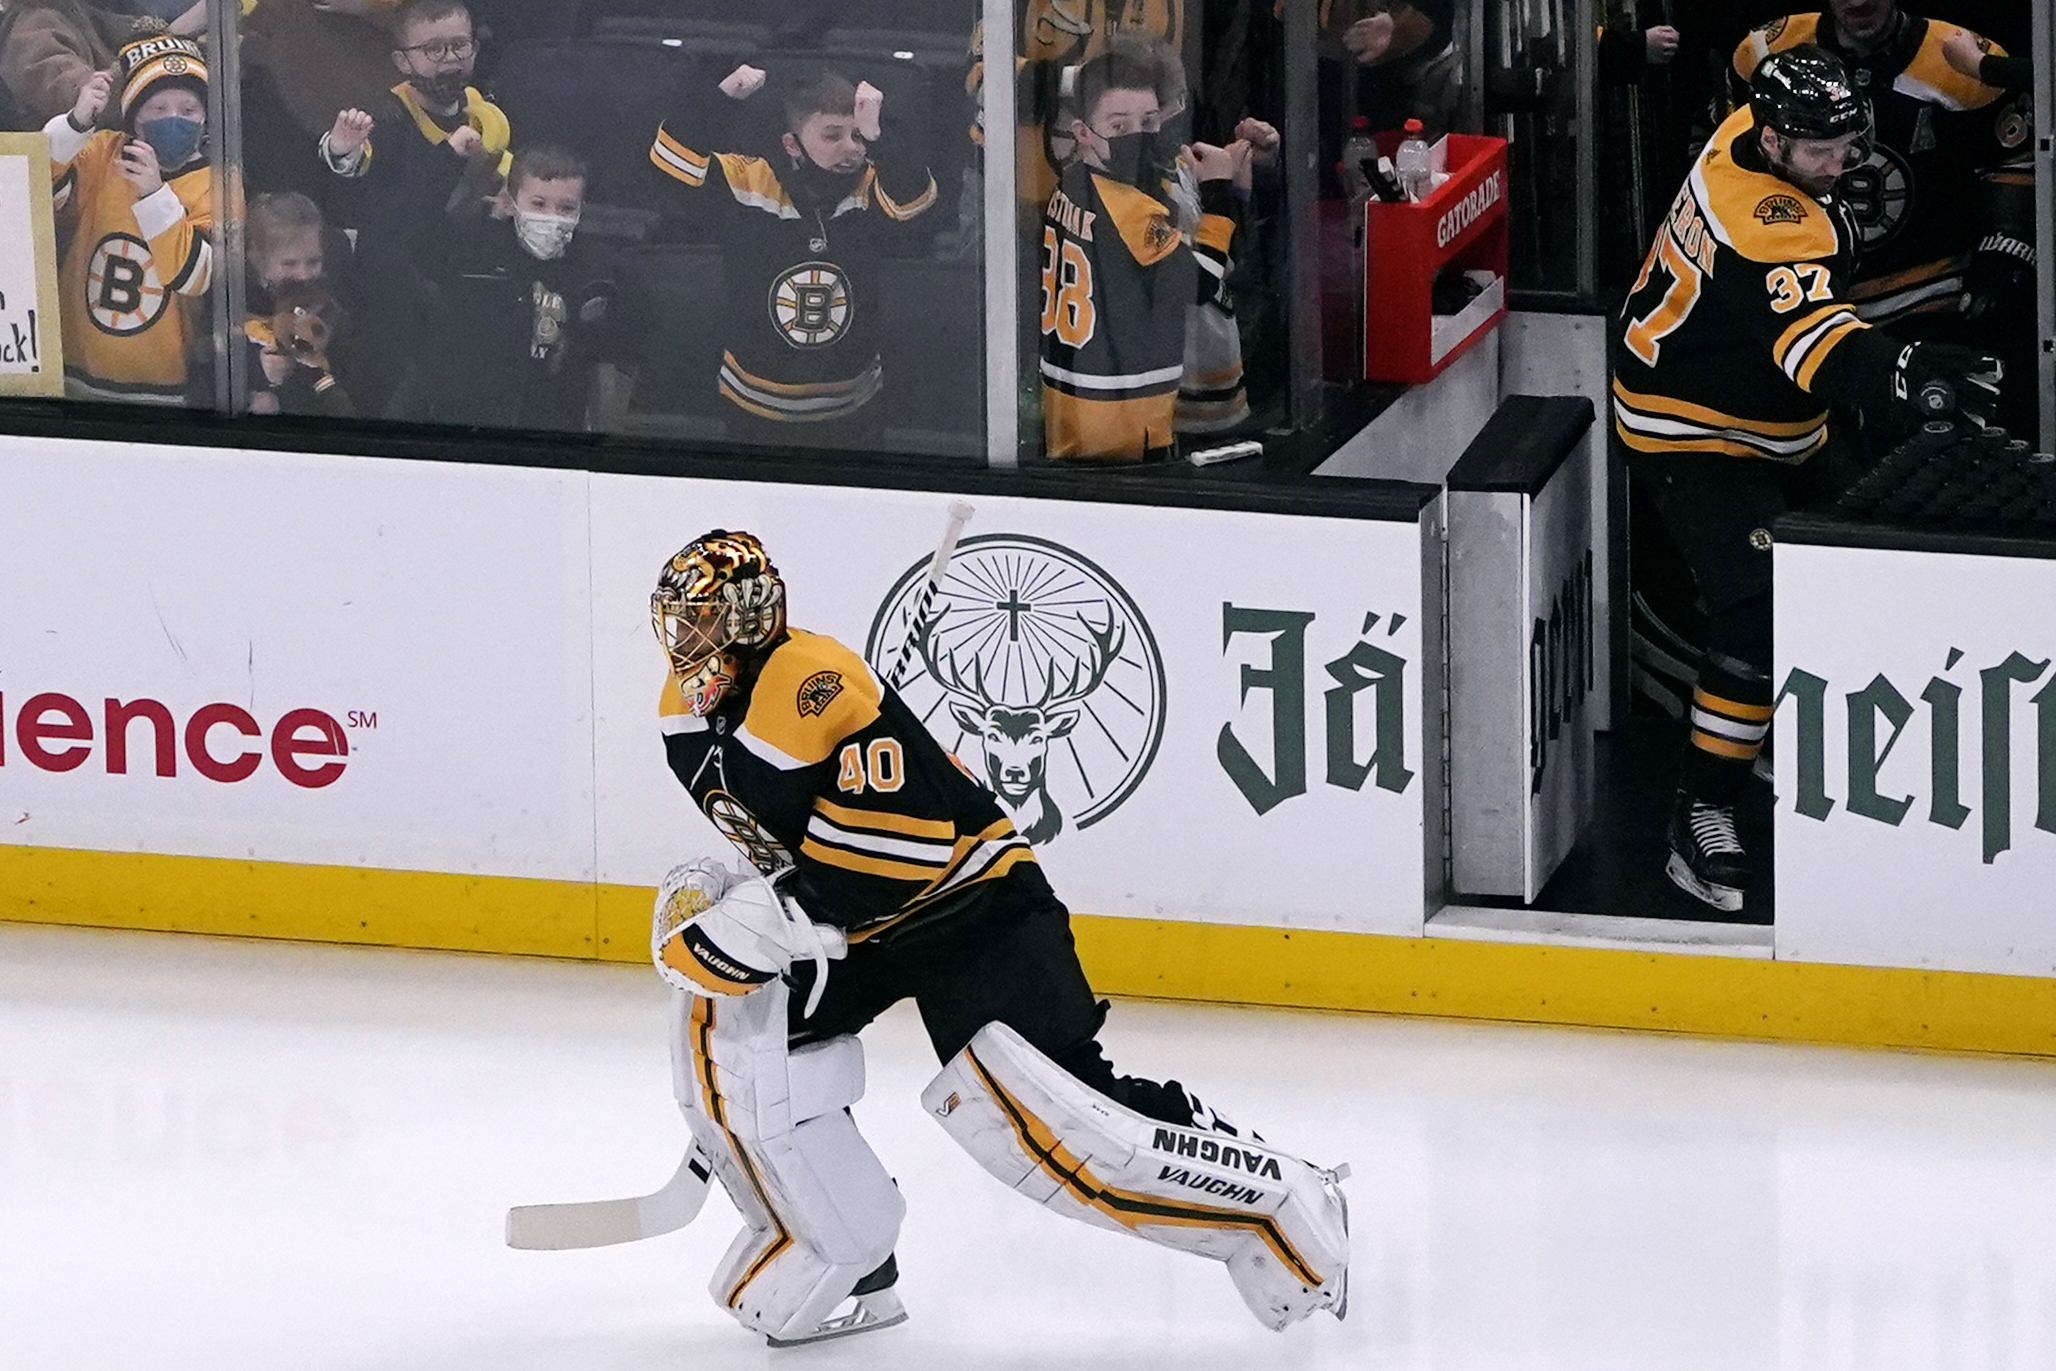 Tuukka Rask close to return with Bruins, signs with Providence